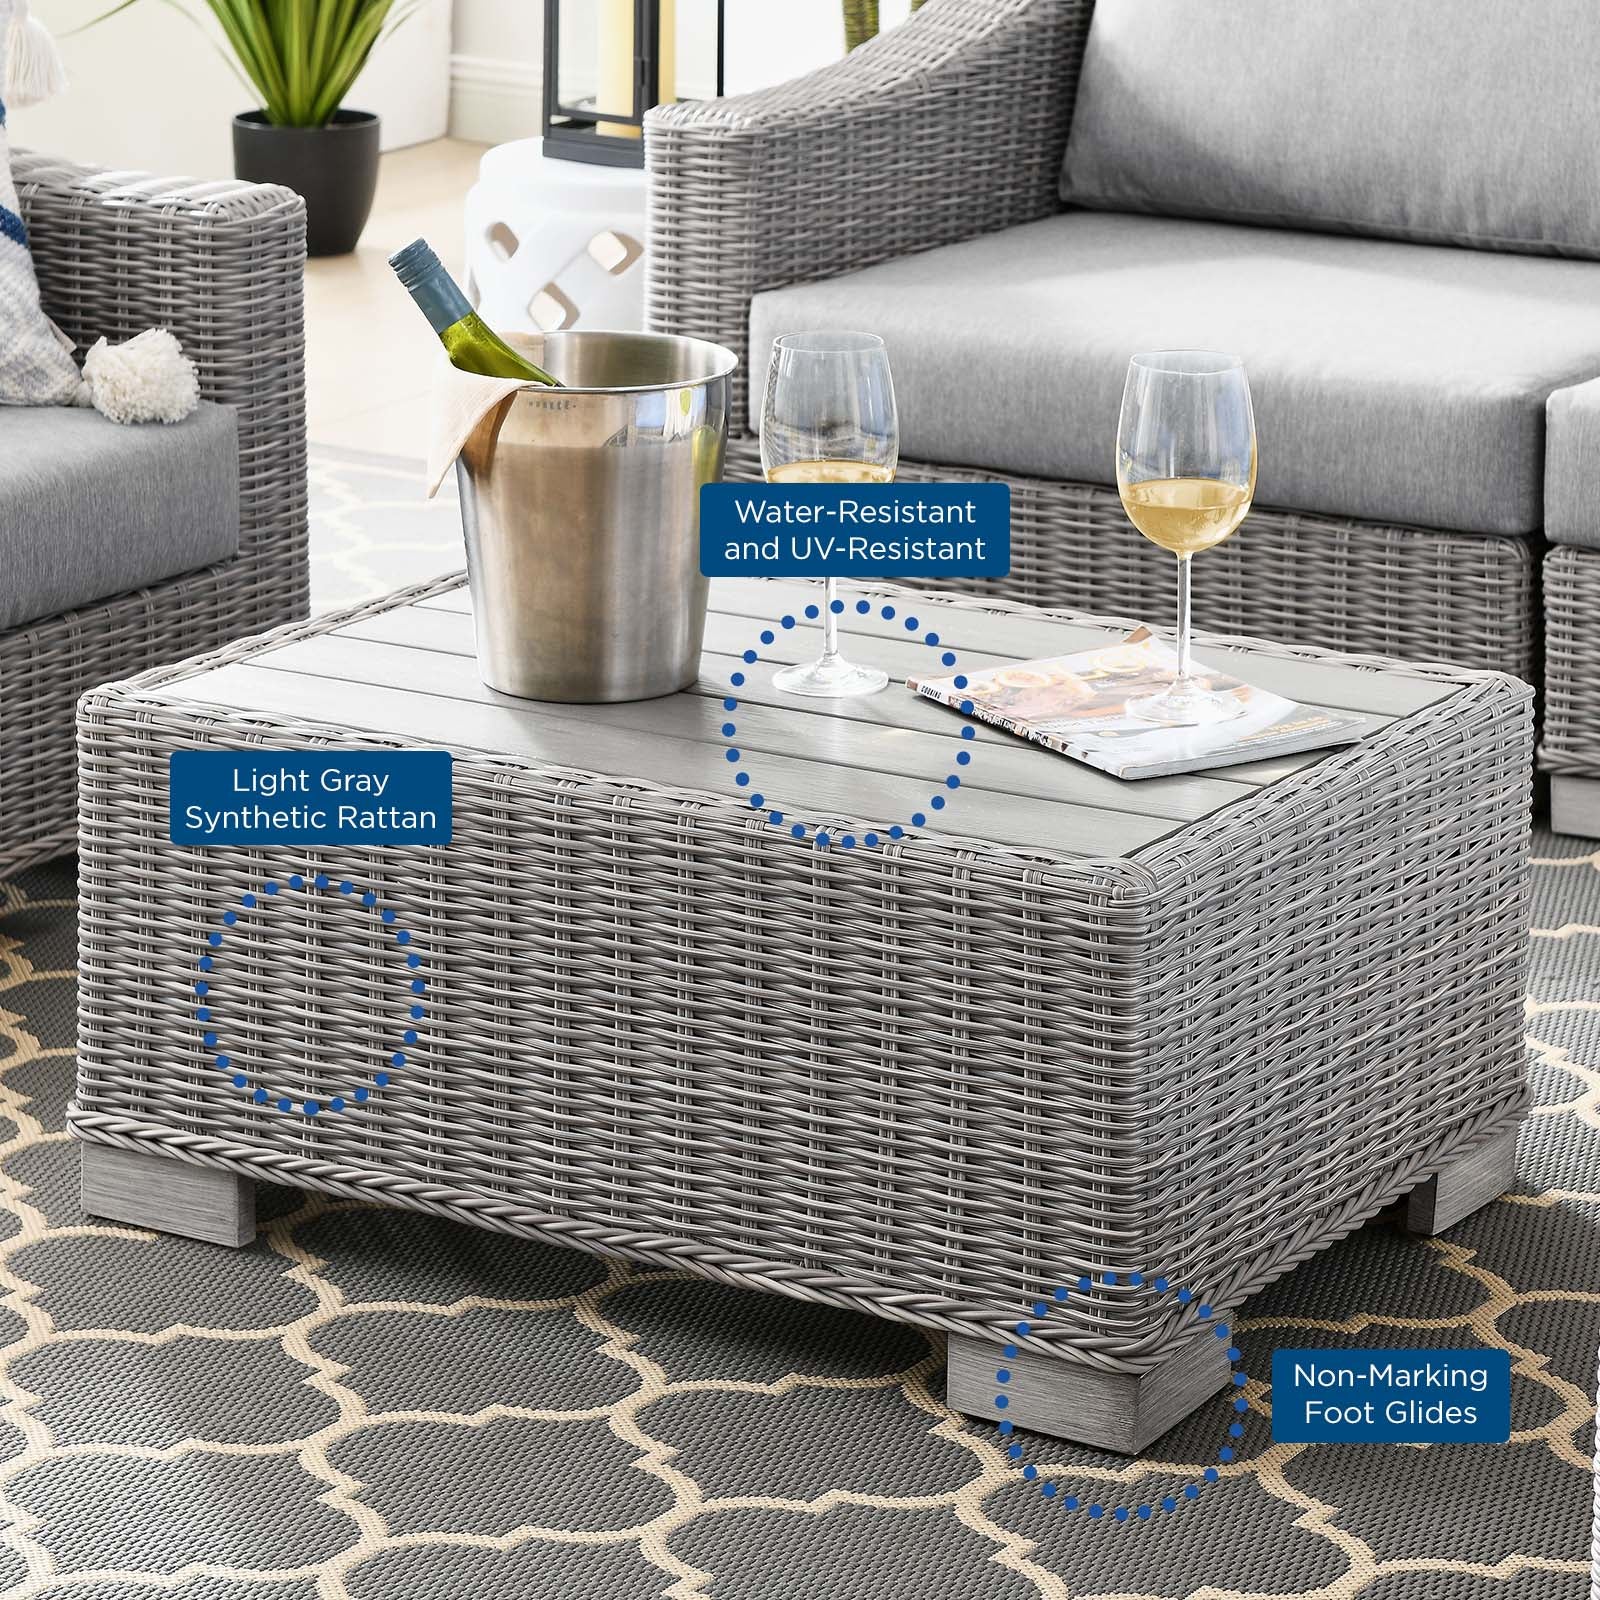 Conway 4-Piece Outdoor Patio Wicker Rattan Furniture Set - East Shore Modern Home Furnishings